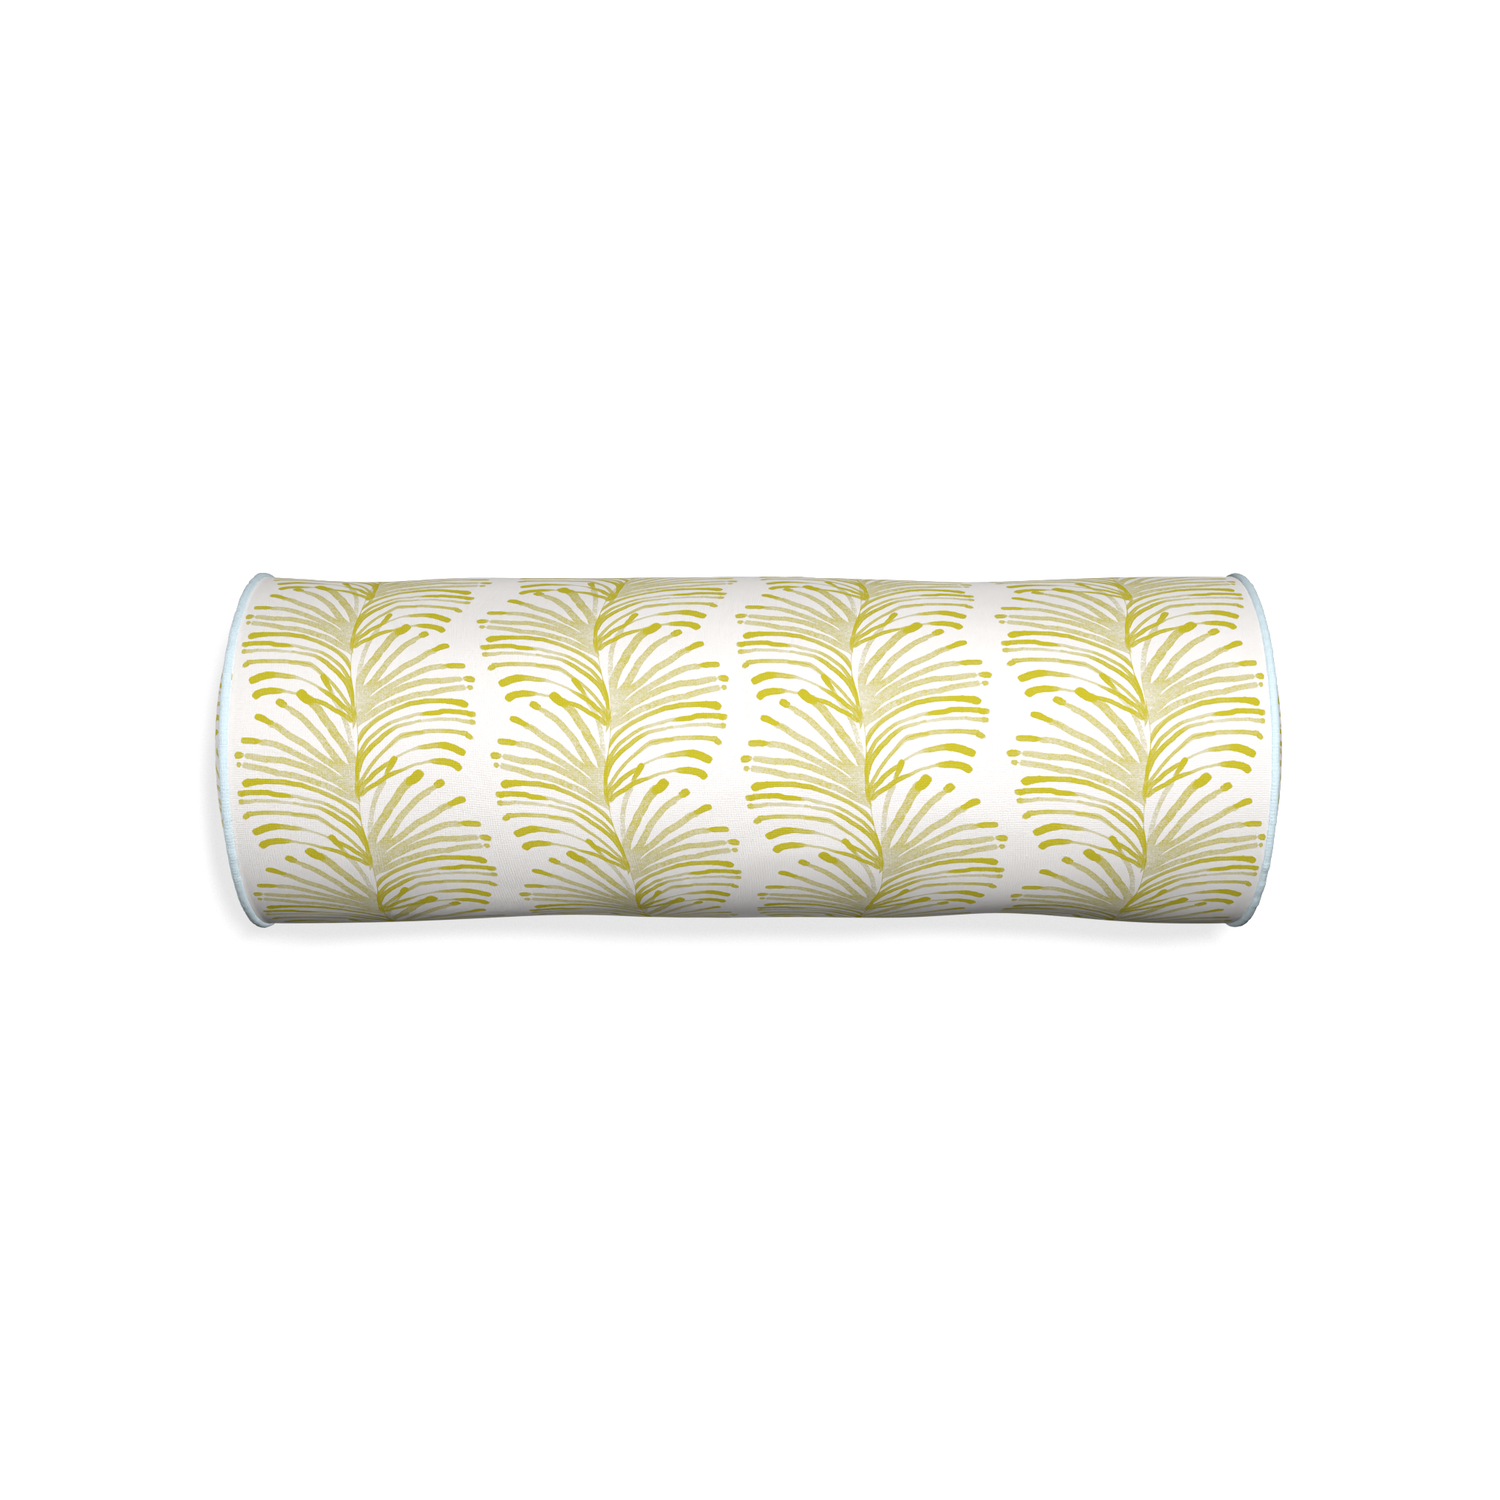 Bolster emma chartreuse custom yellow stripe chartreusepillow with powder piping on white background